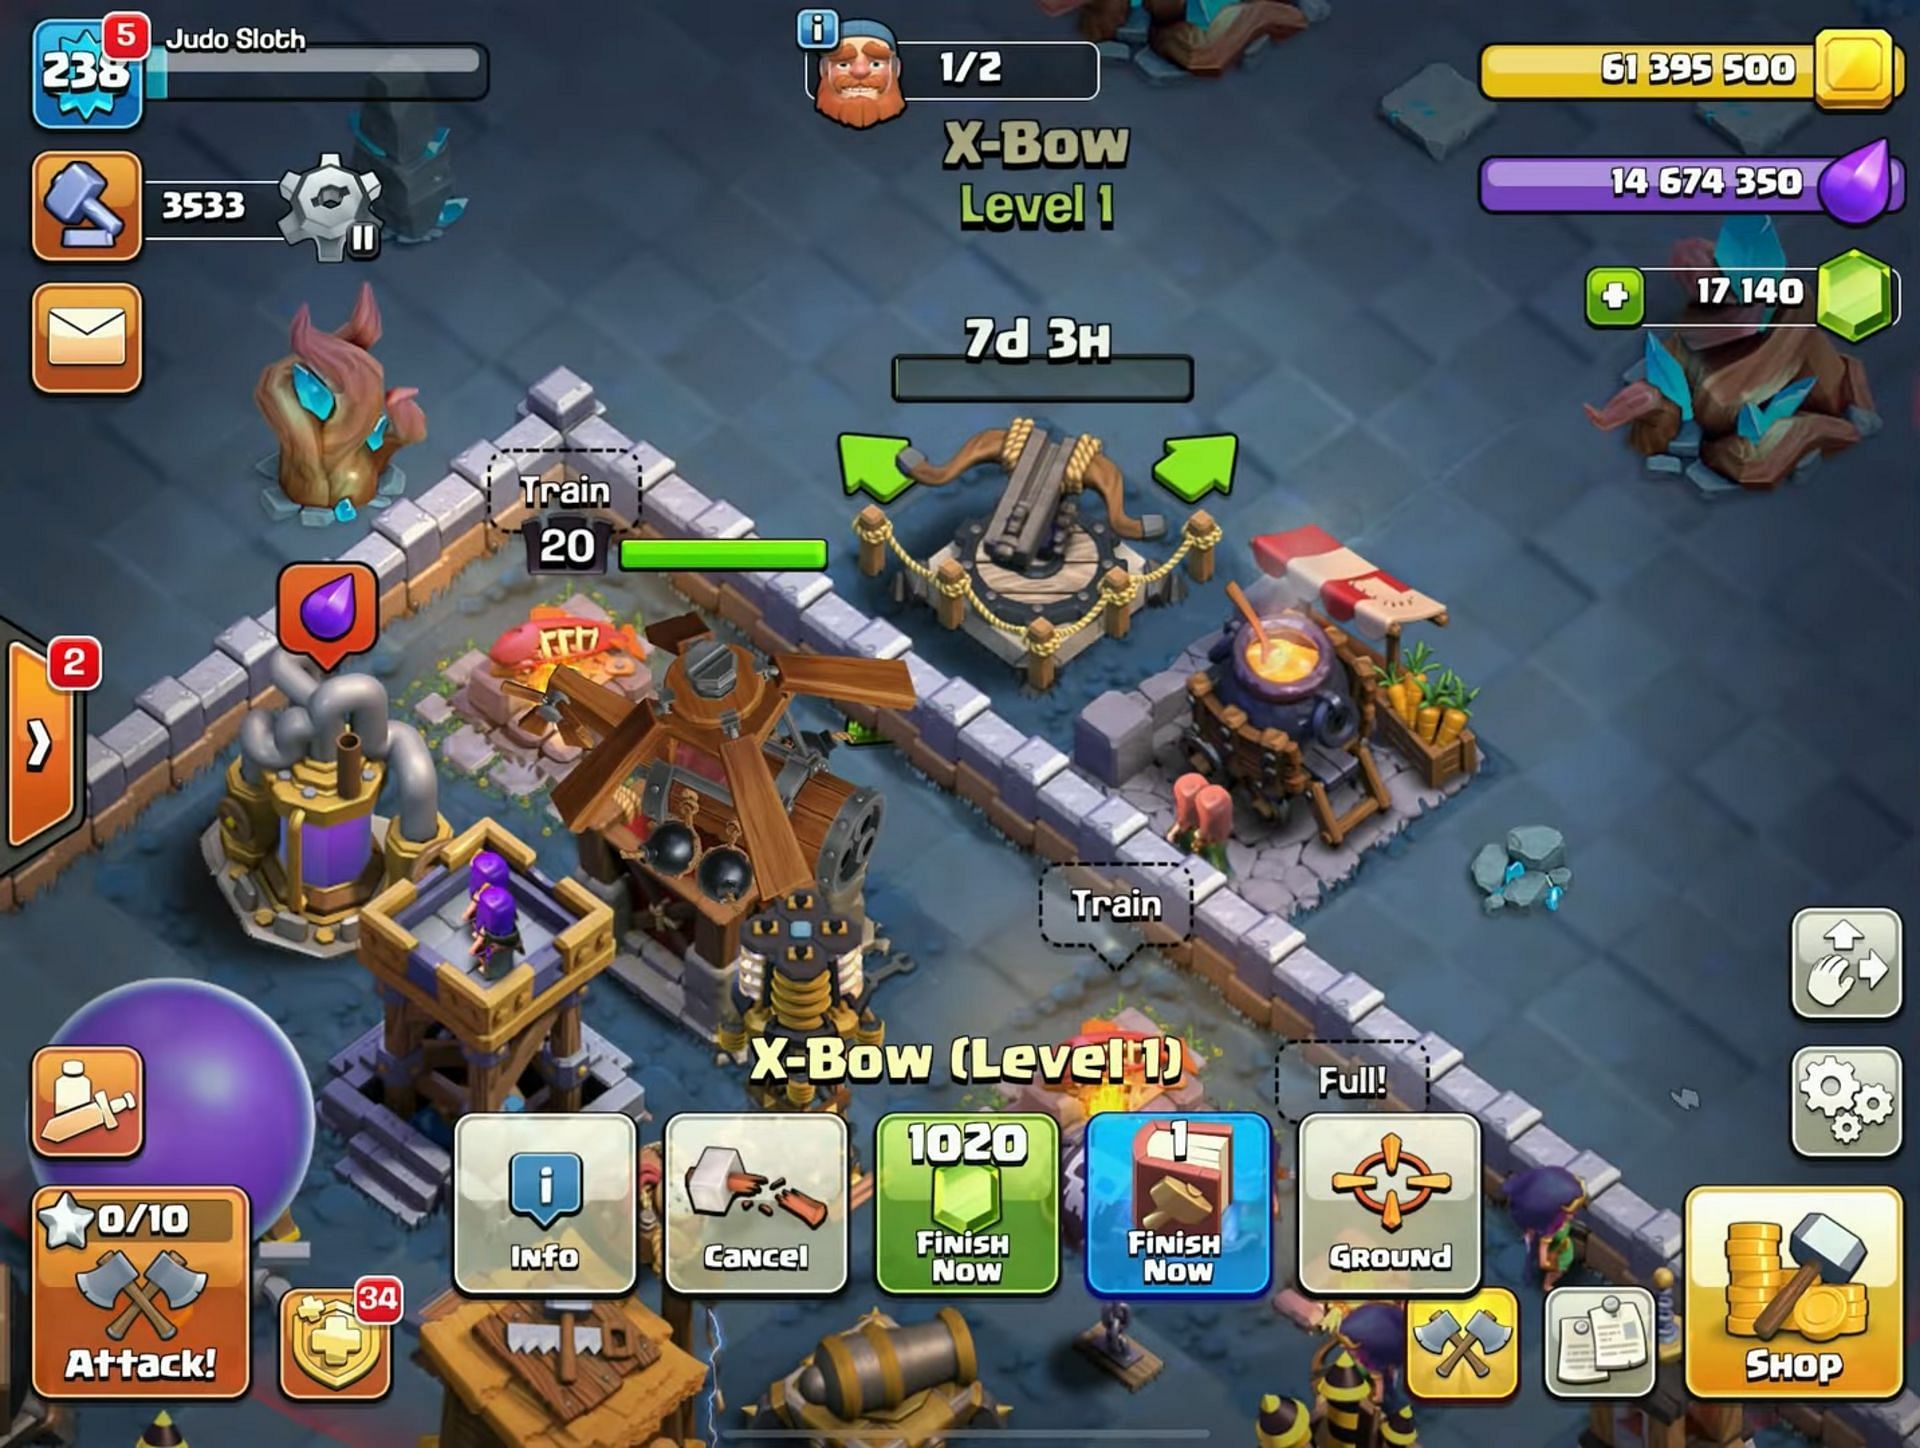 X-Bow is the flagship Builder Base defense that Supercell introduced for BH10 via the recent Clash of Clans update (Image via YouTube / Judo Sloth Gaming)